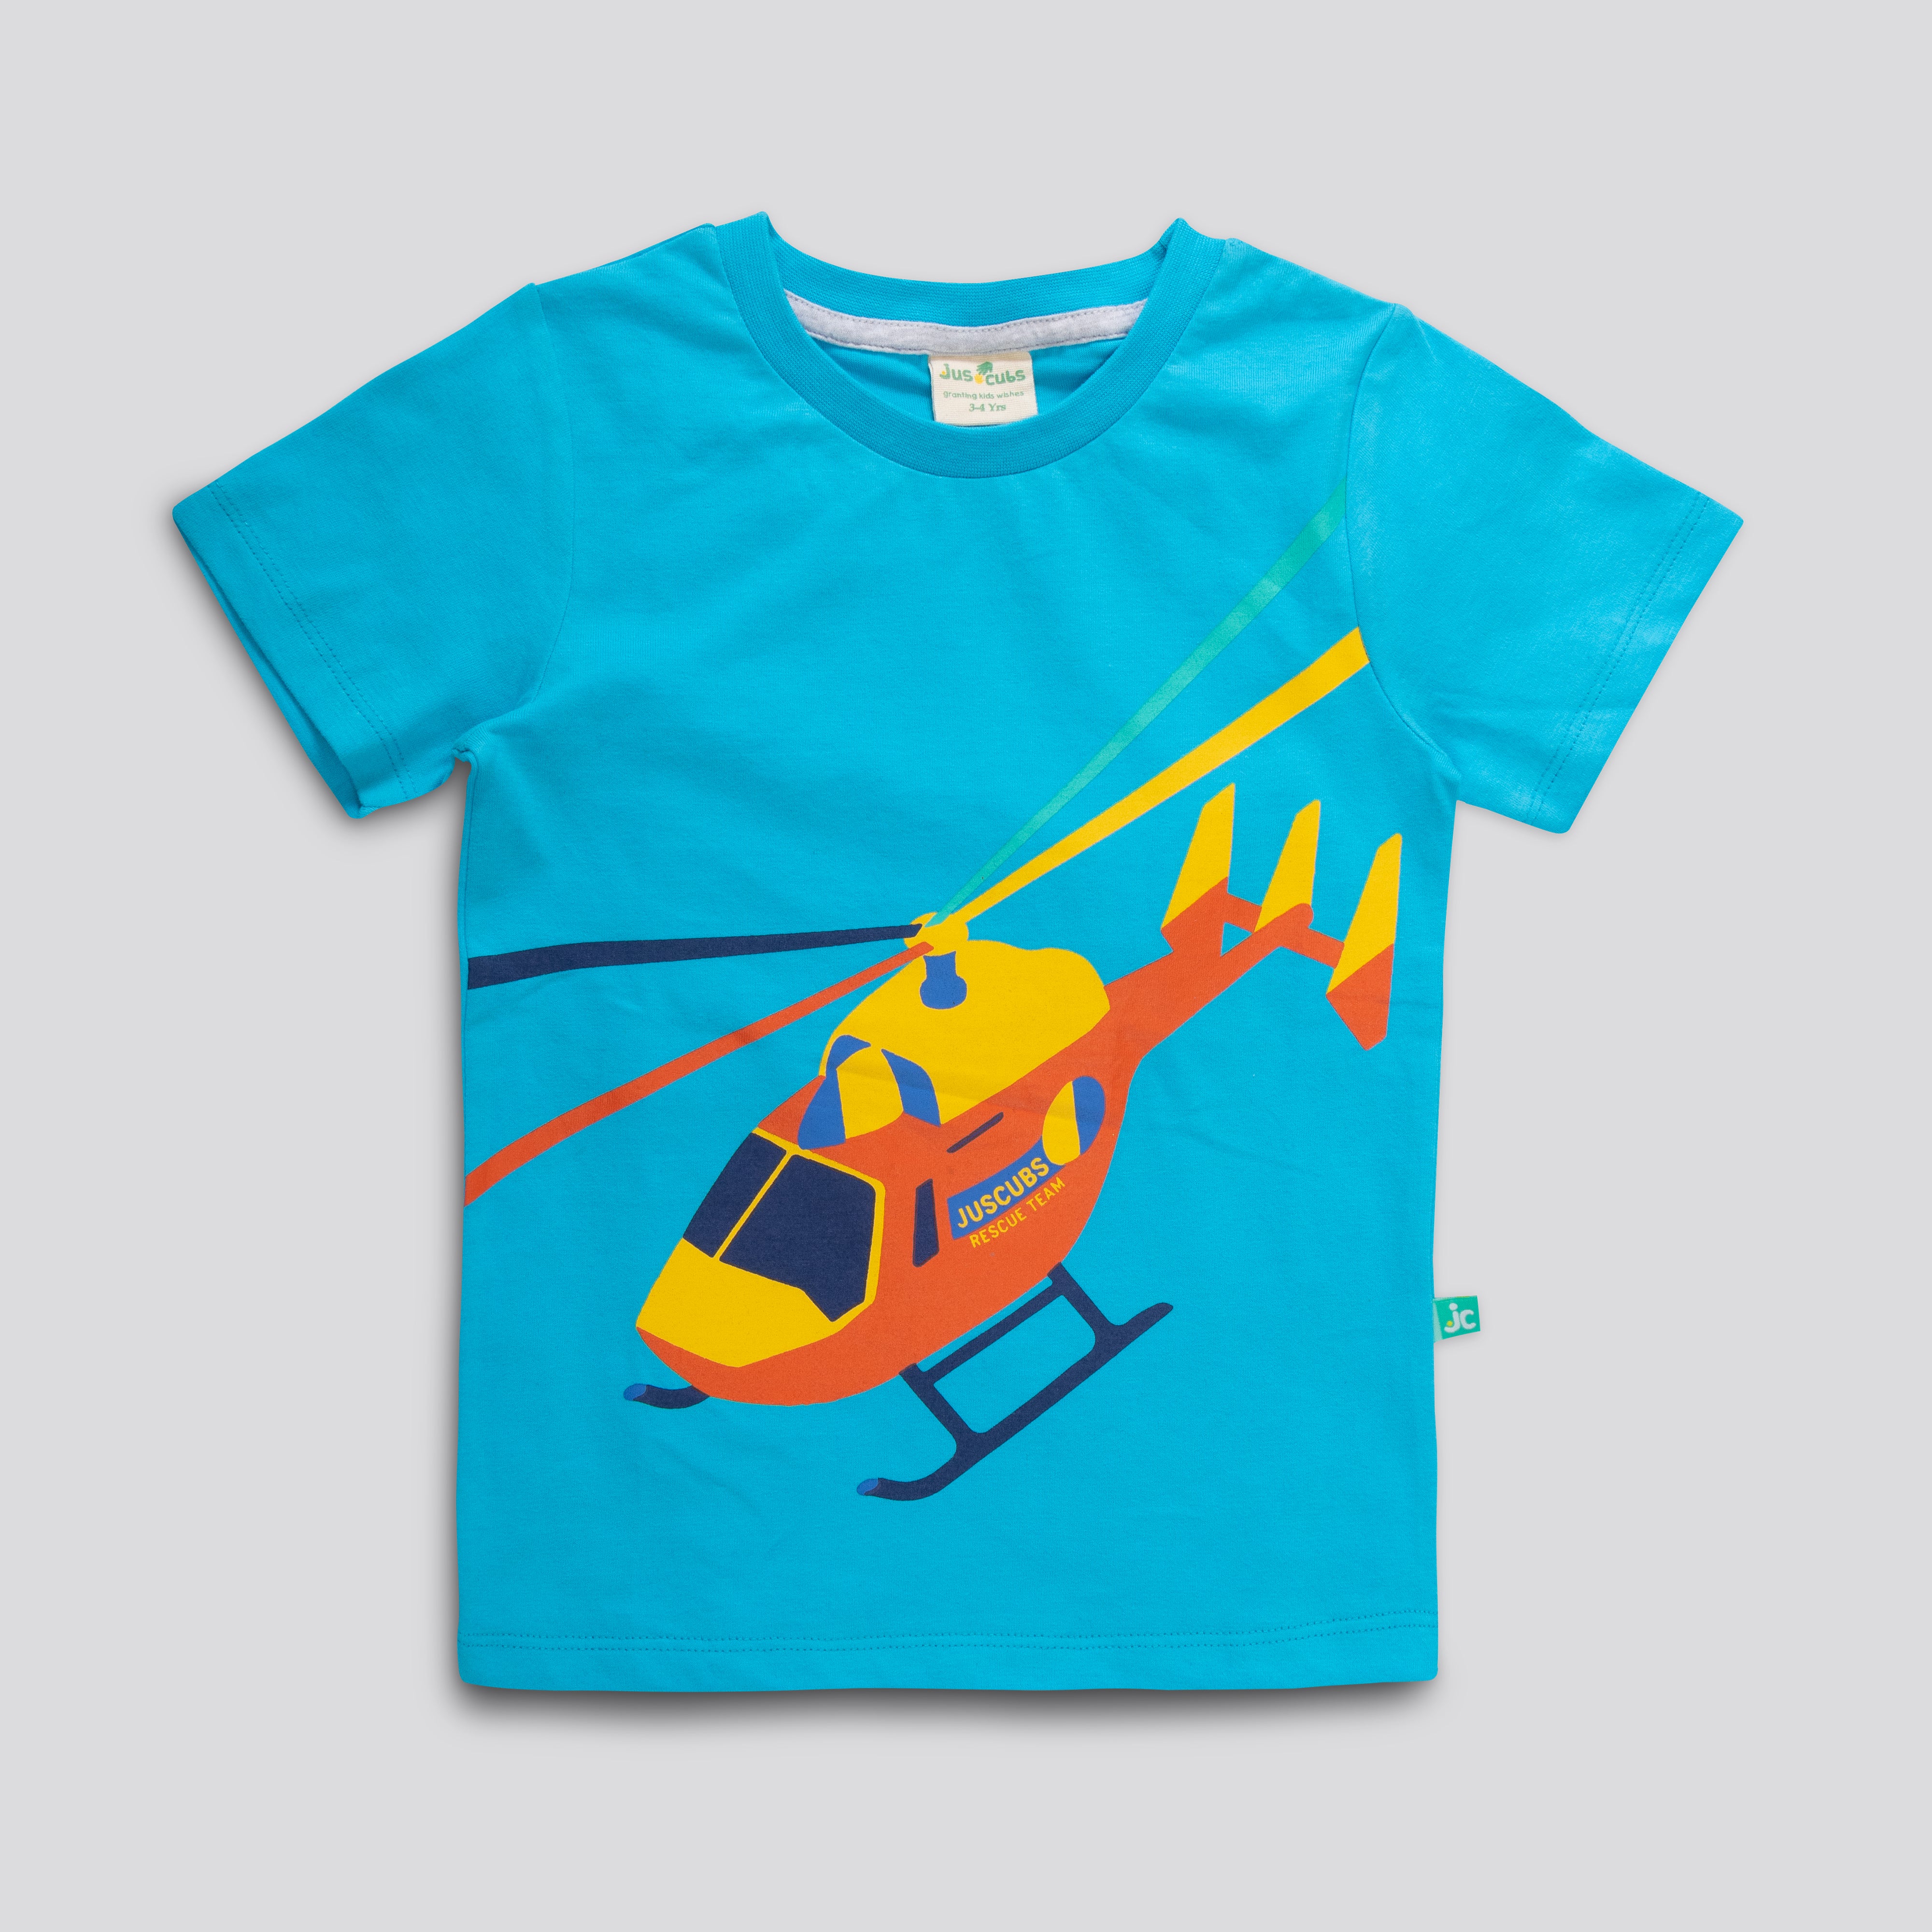 Boys Helicopter Printed T-Shirt